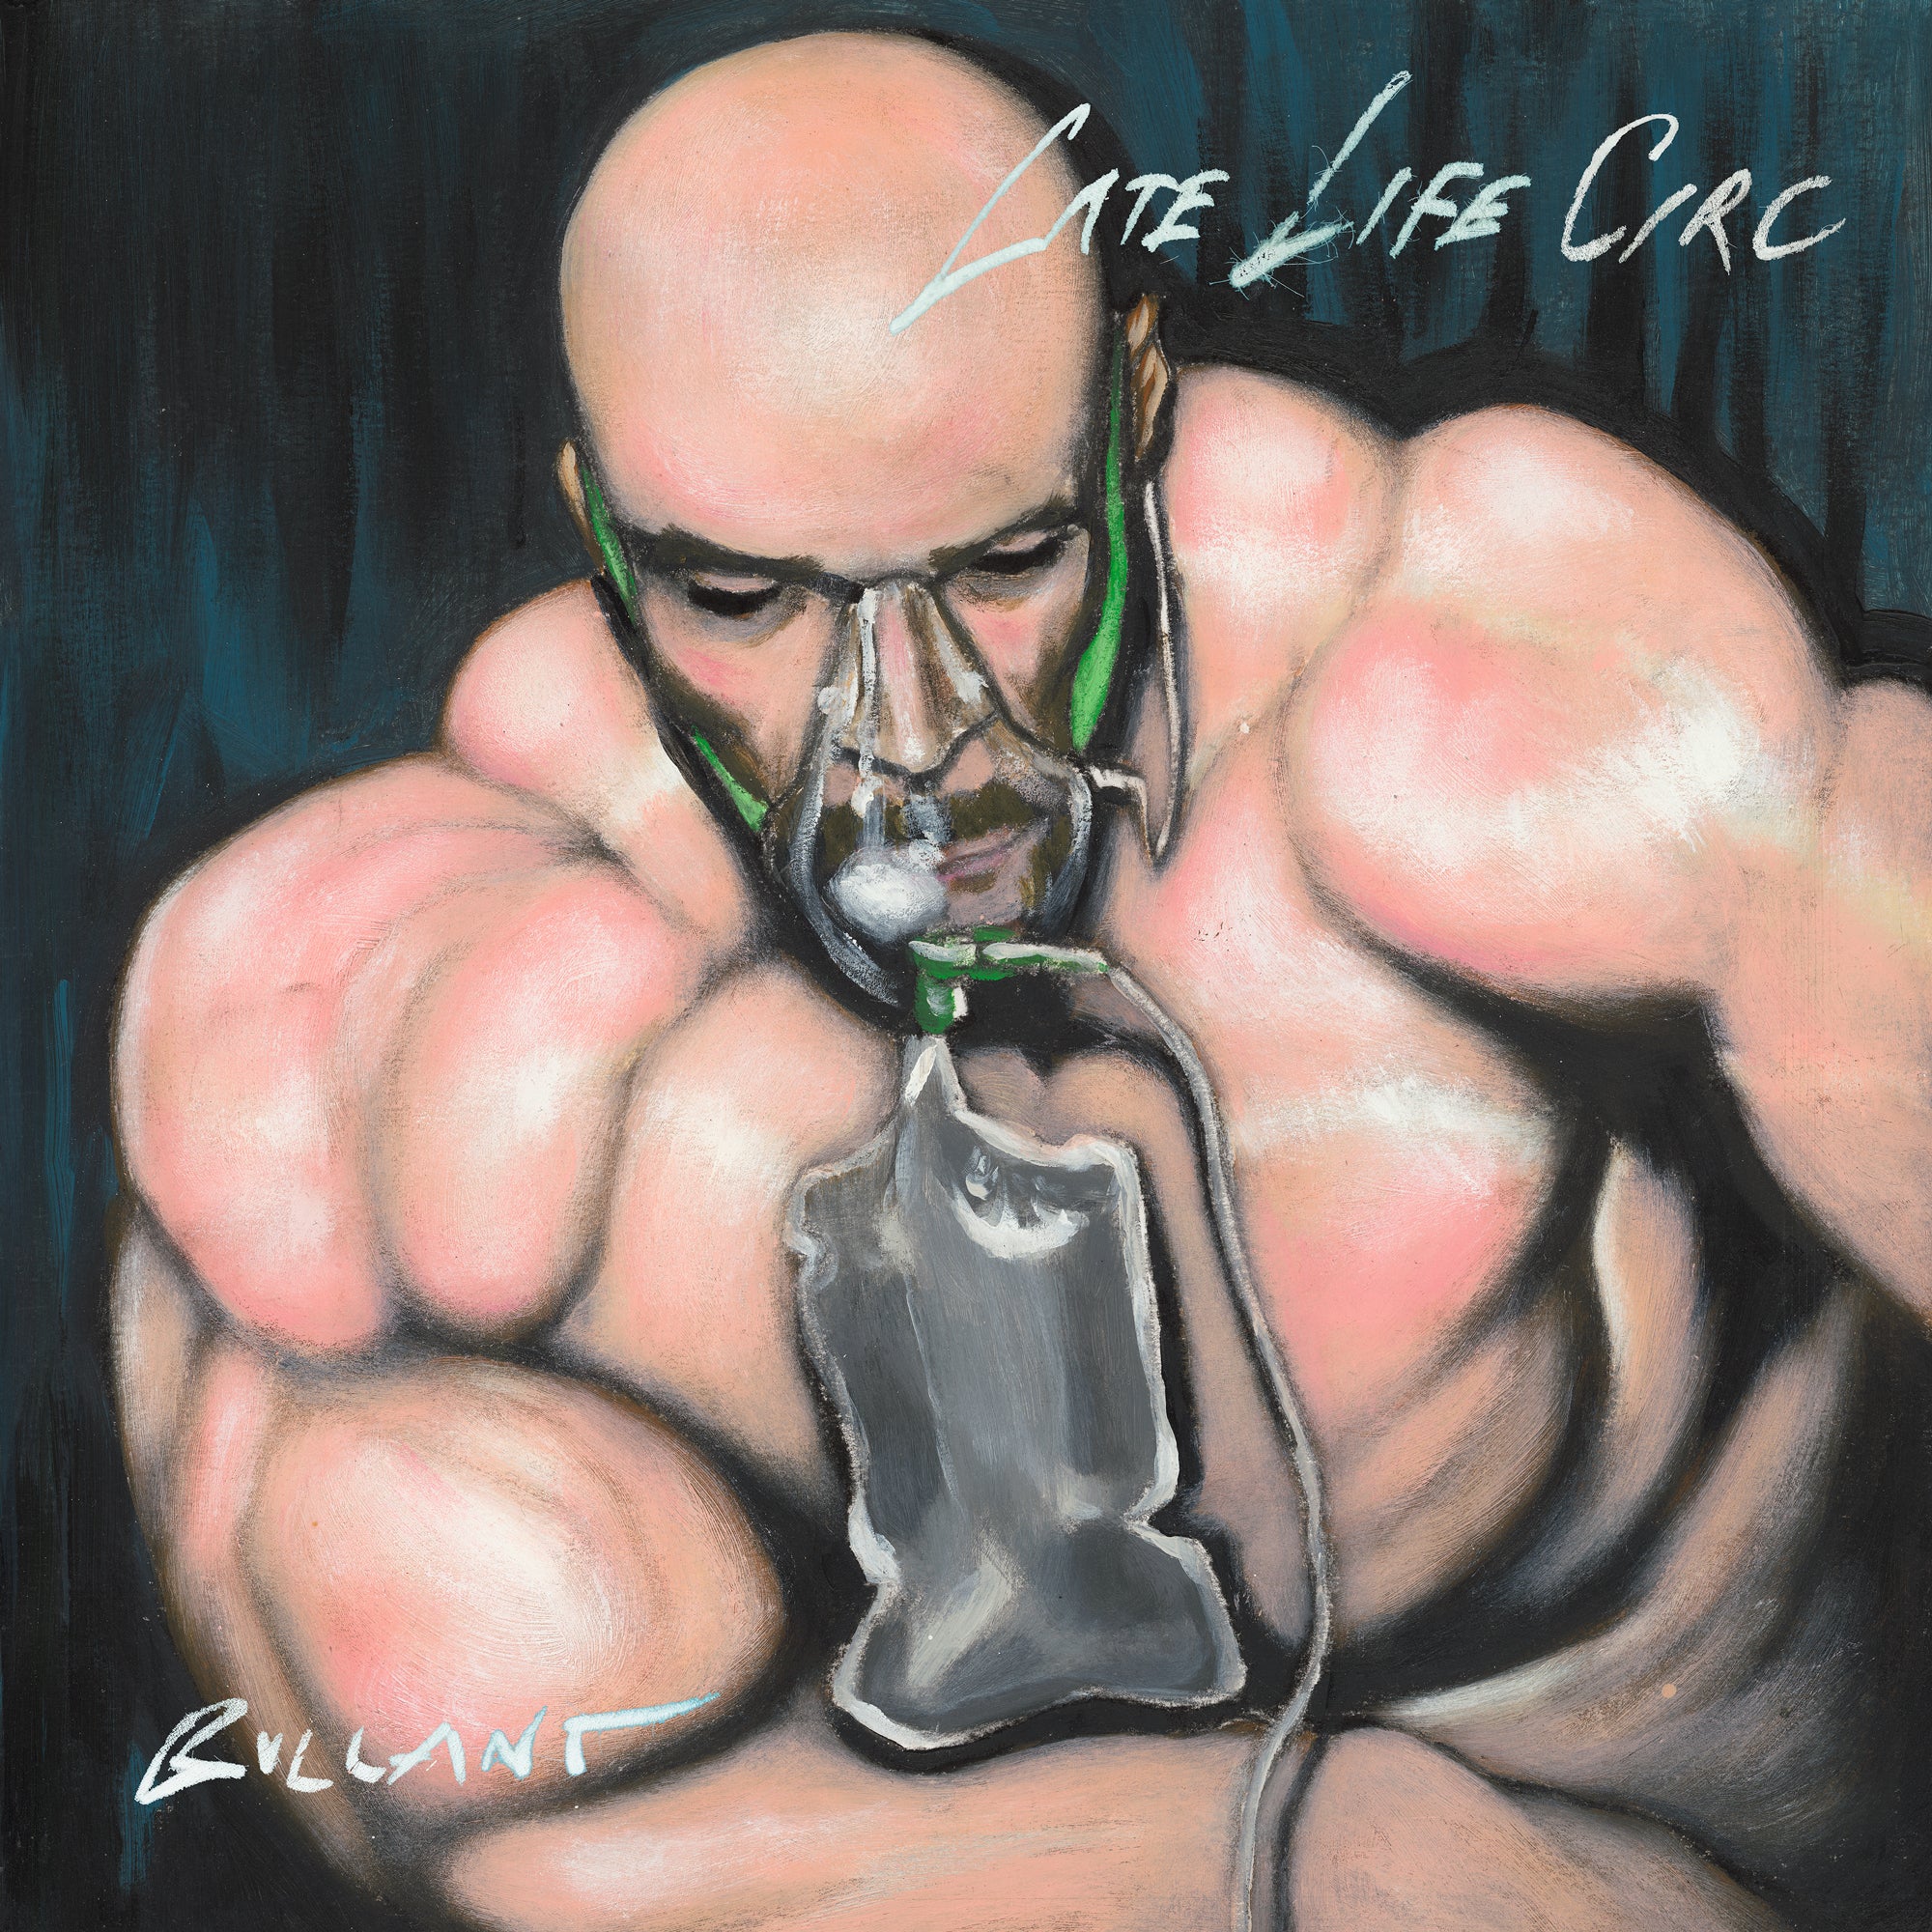  Late Life Circ LP Cover